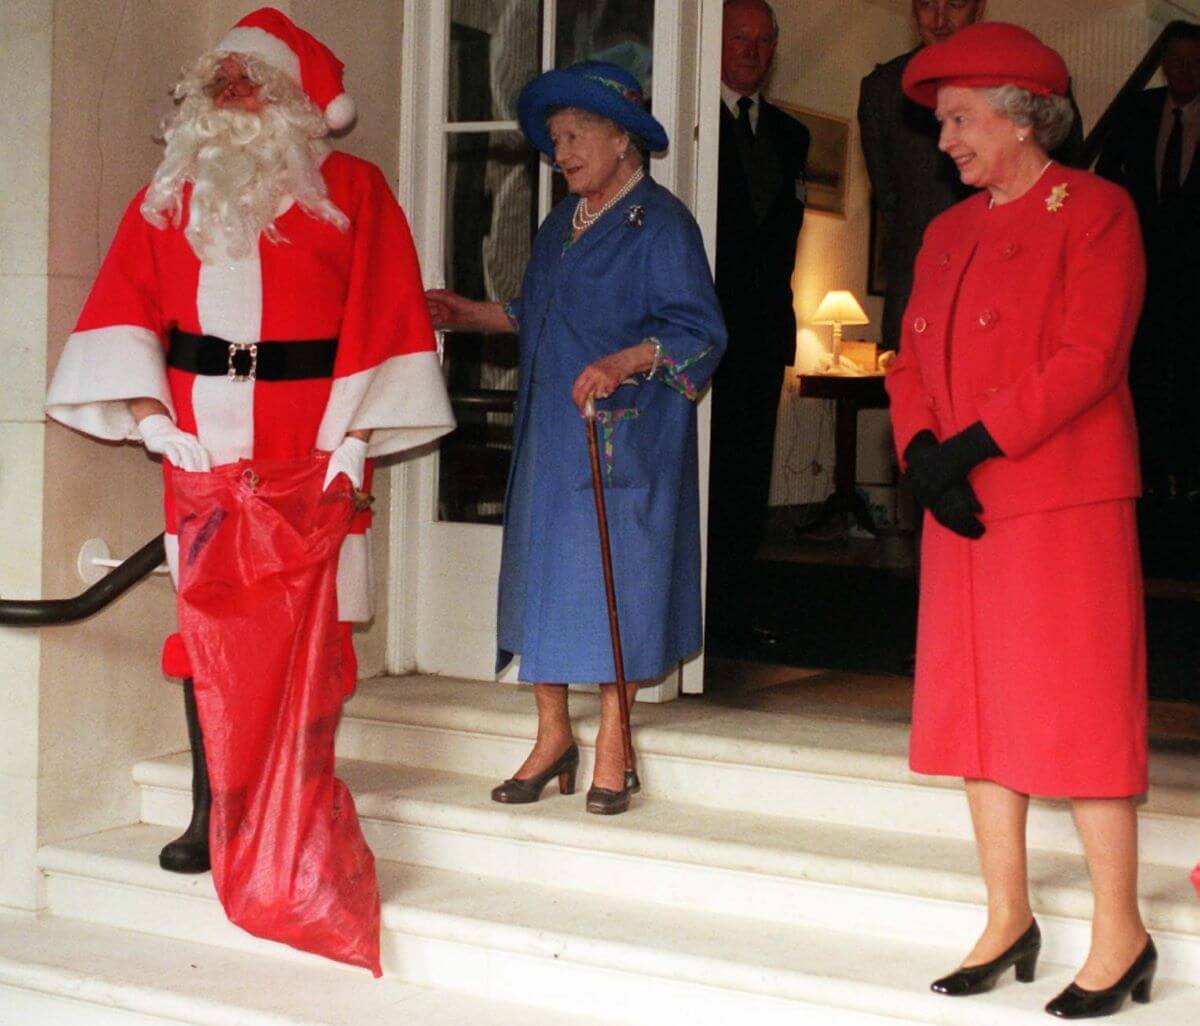 Queen Elizabeth II and her mom, The Queen Mother, ready to assist Santa as he prepare to give out gifts